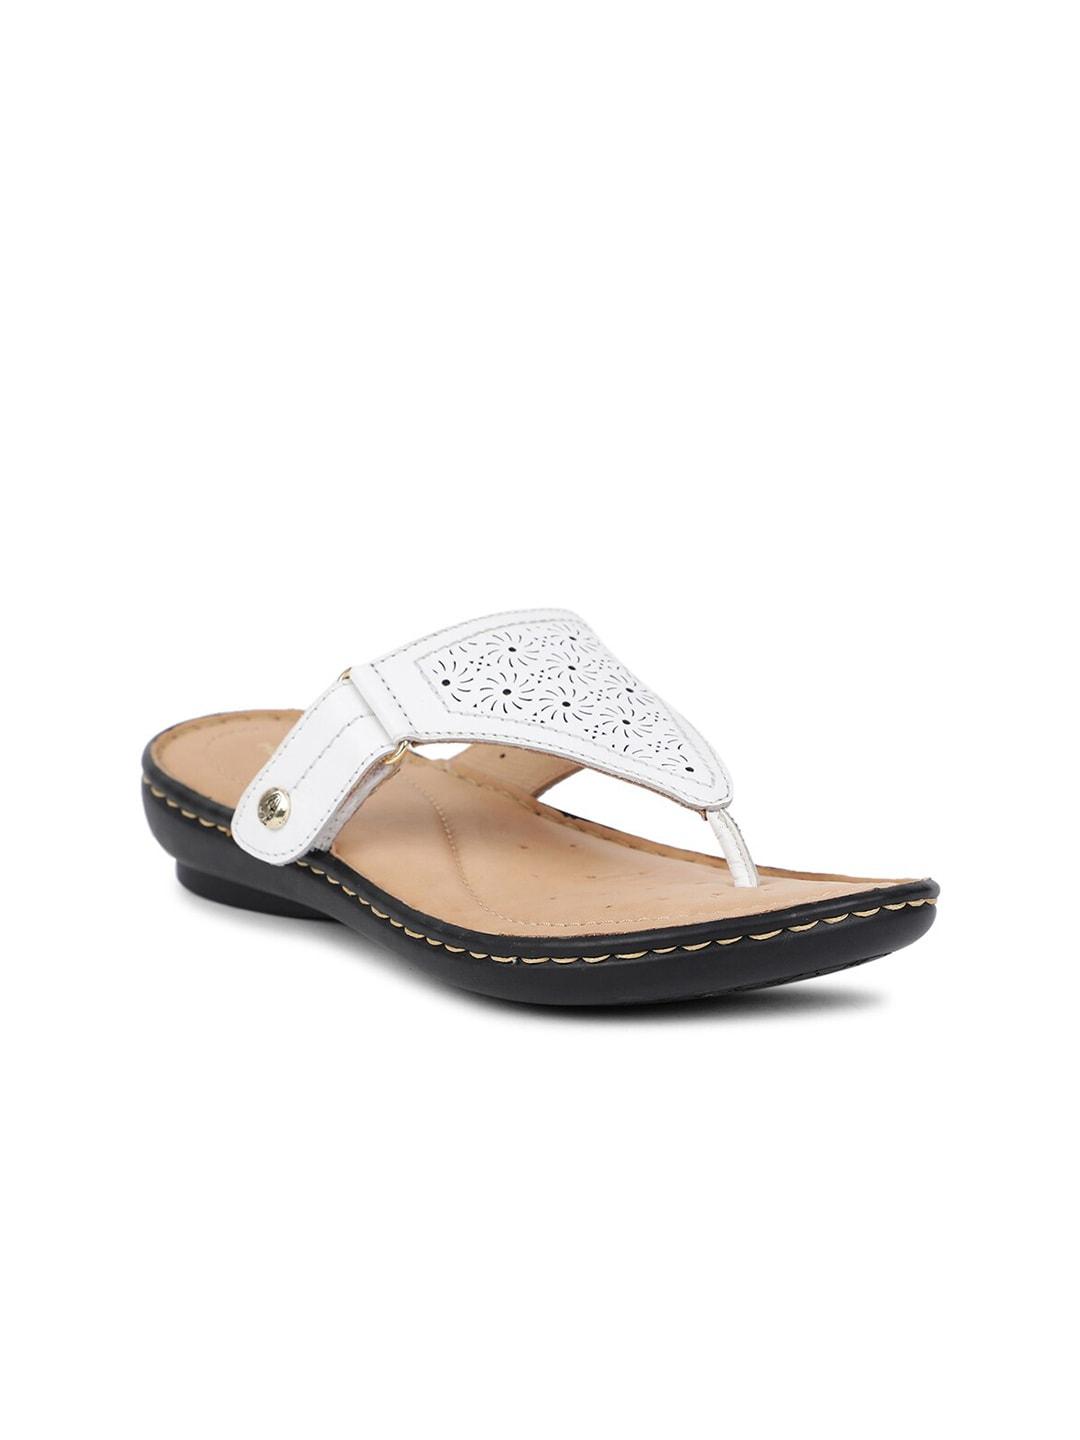 hush-puppies-women-white-t-strap-flats-with-laser-cuts